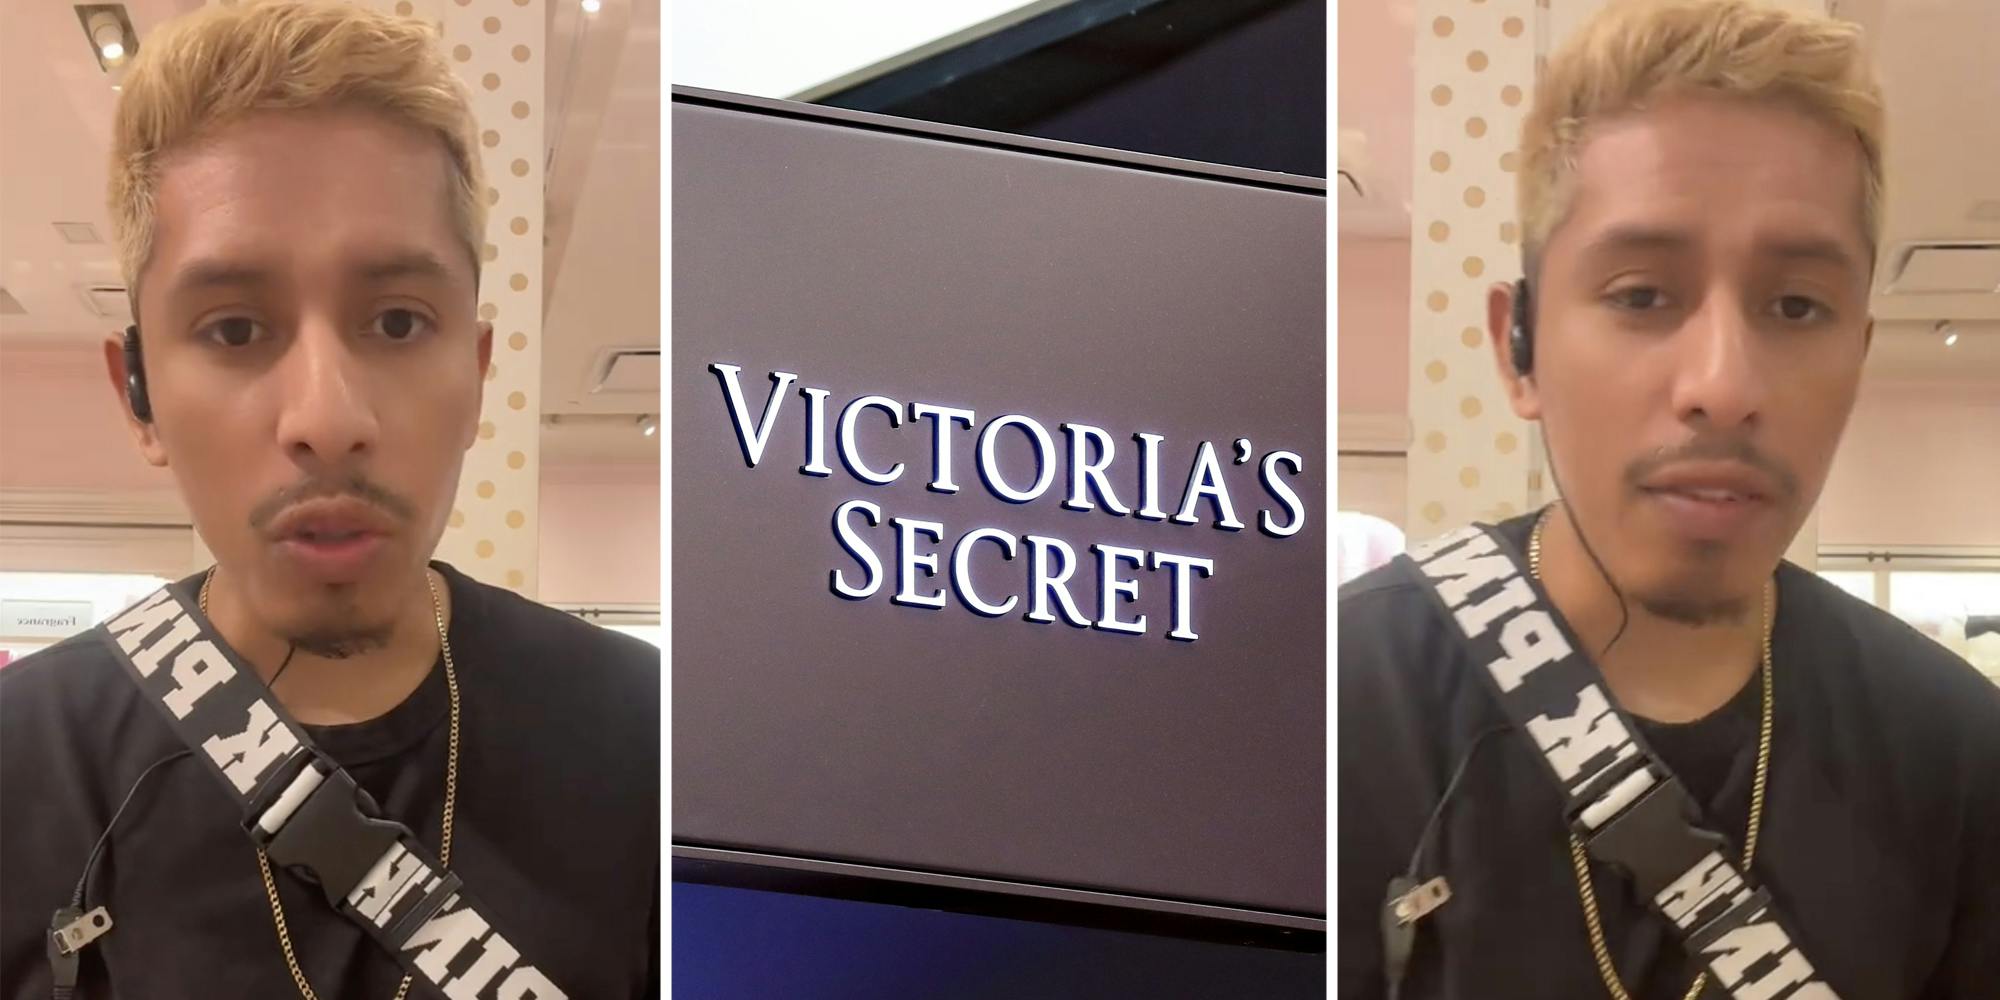 ‘So don’t buy lotion from Victoria’s Secret, got it’: Victoria’s Secret worker shares lotion tip for other employees. It backfires